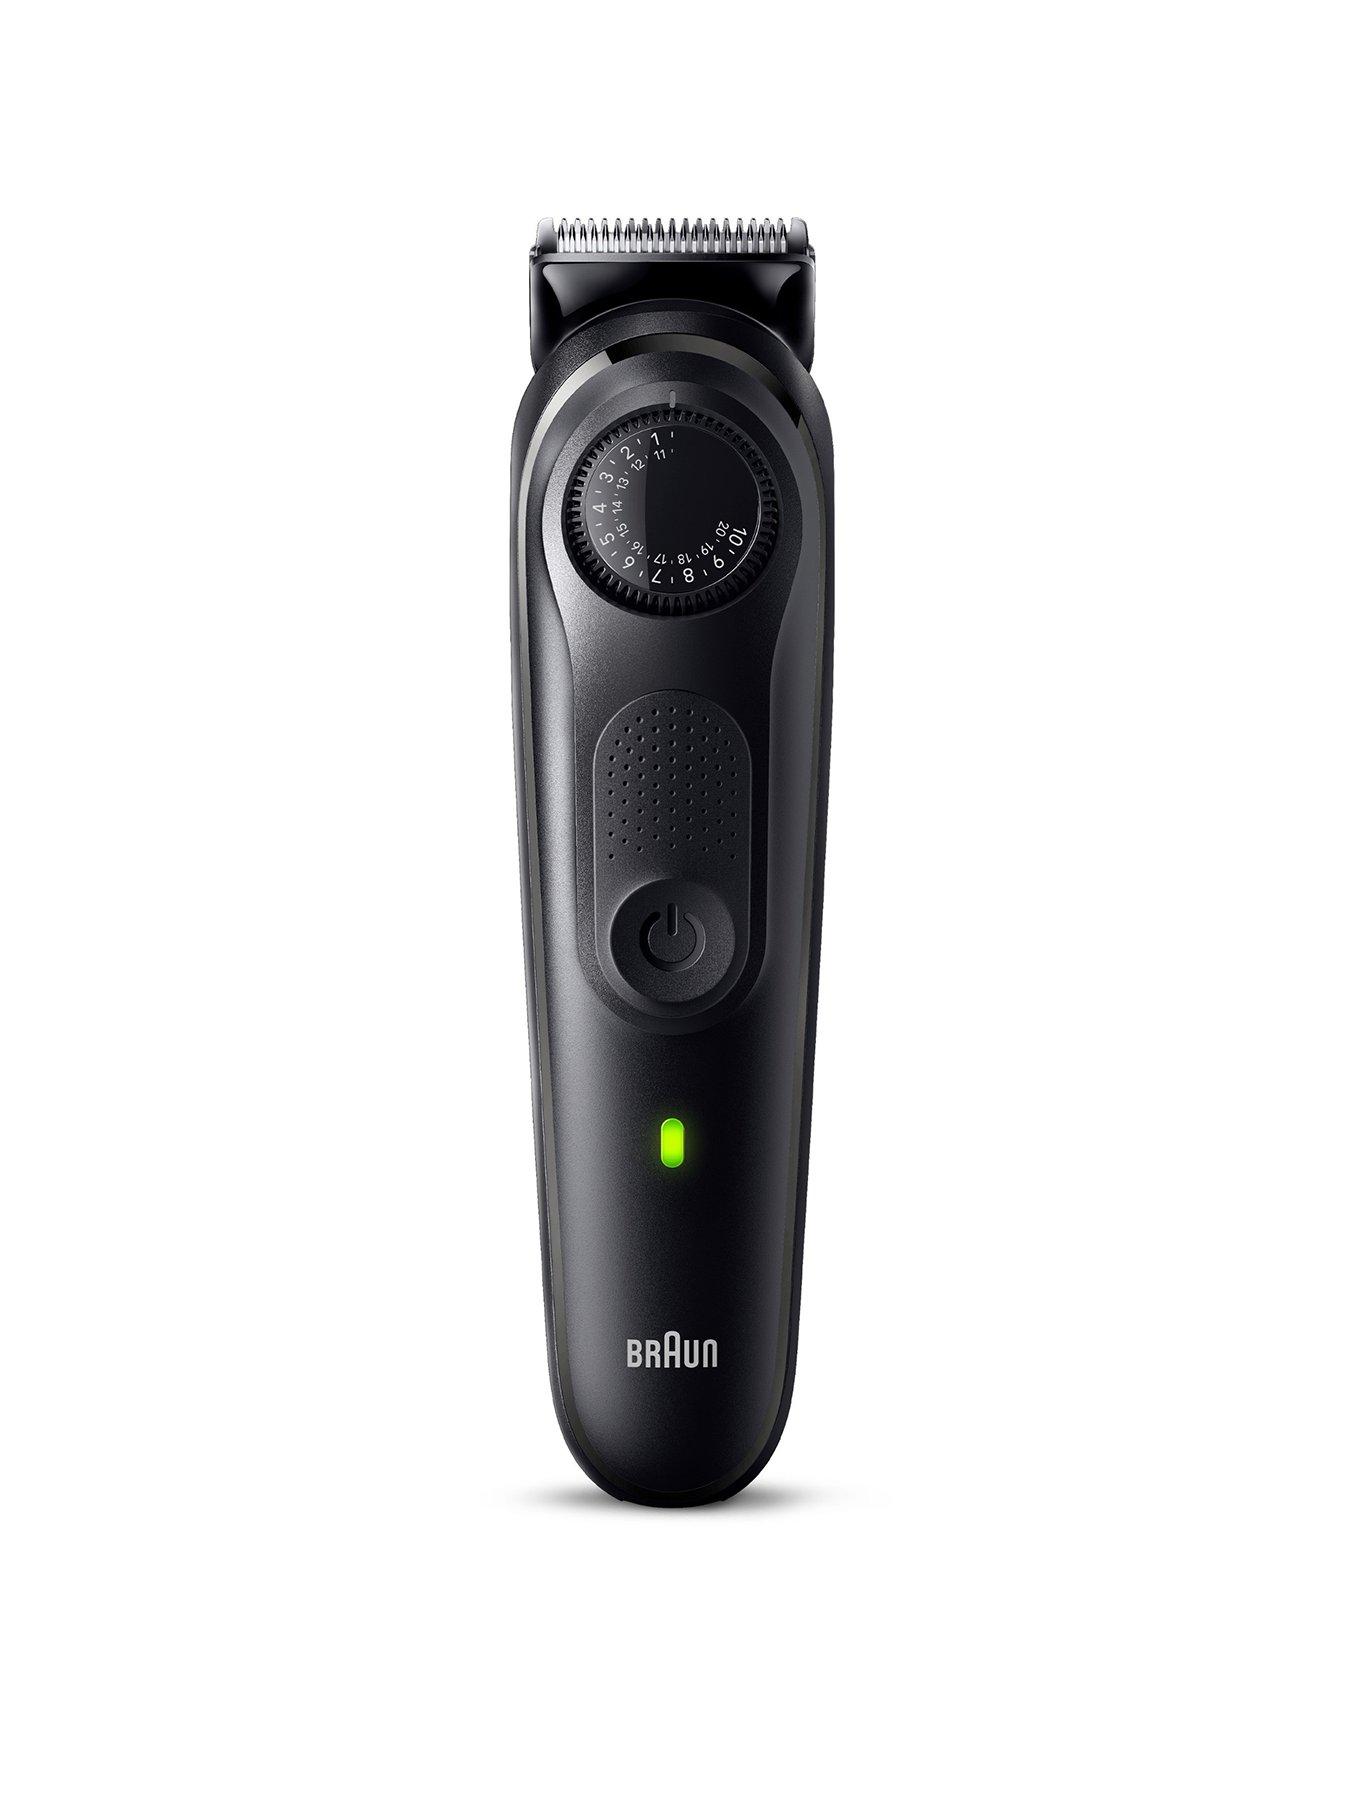 Braun Beard Trimmer Series 5 For Men With Styling Tools And 100-min Runtime | very.co.uk